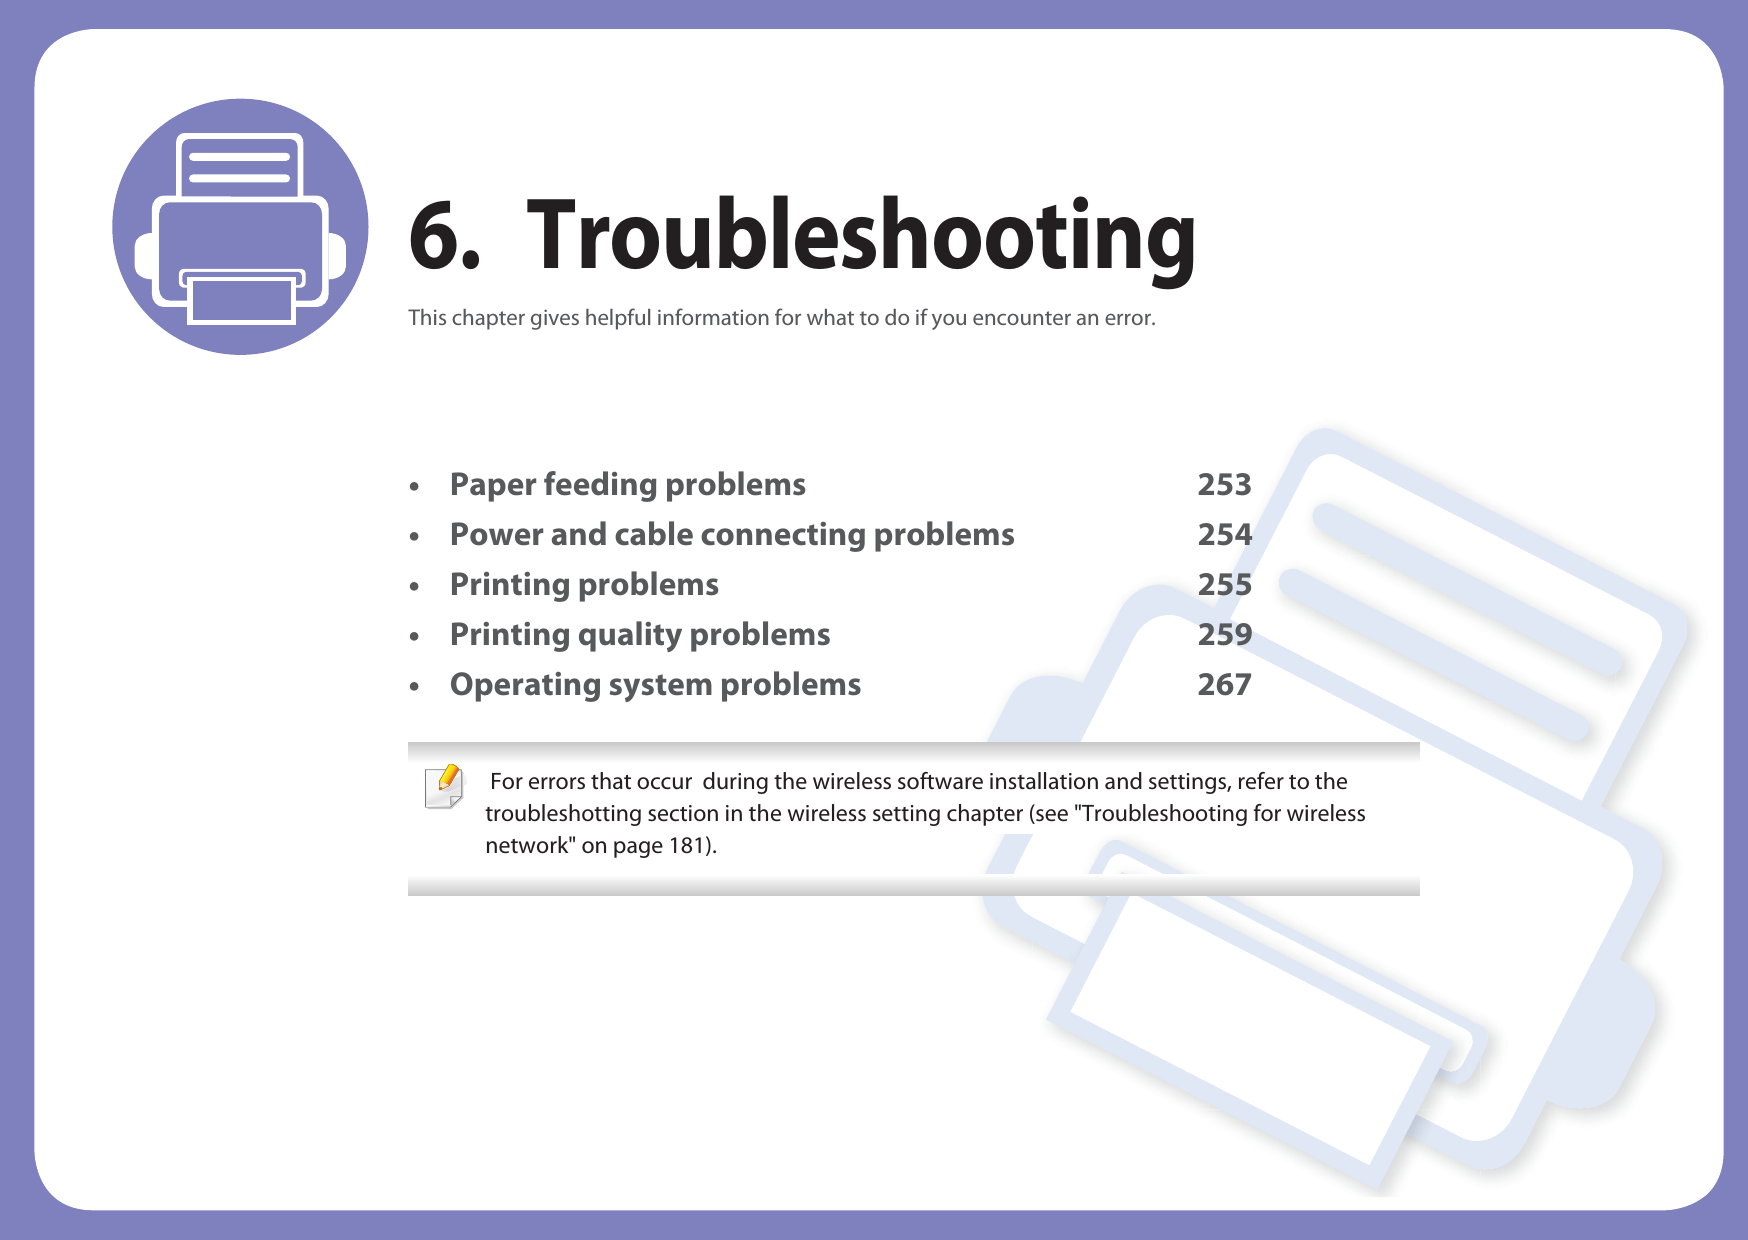 6. TroubleshootingThis chapter gives helpful information for what to do if you encounter an error.• Paper feeding problems 253• Power and cable connecting problems 254• Printing problems 255• Printing quality problems 259• Operating system problems 267  For errors that occur  during the wireless software installation and settings, refer to the troubleshotting section in the wireless setting chapter (see &quot;Troubleshooting for wireless network&quot; on page 181). 